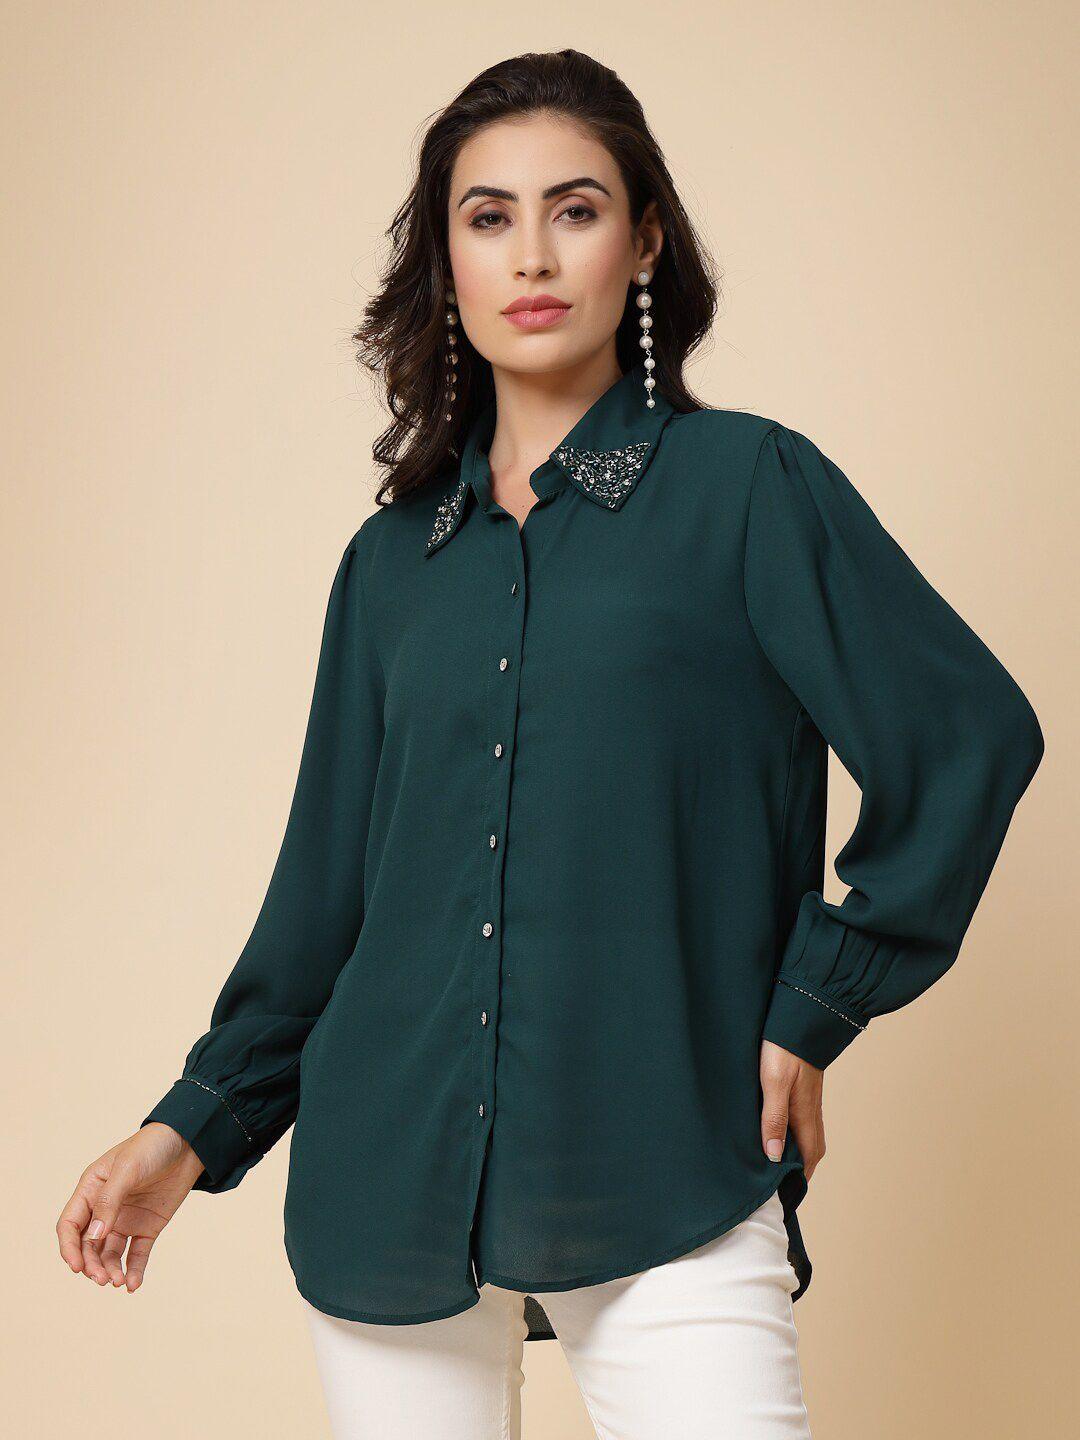 gipsy embellished spread collar casual shirt